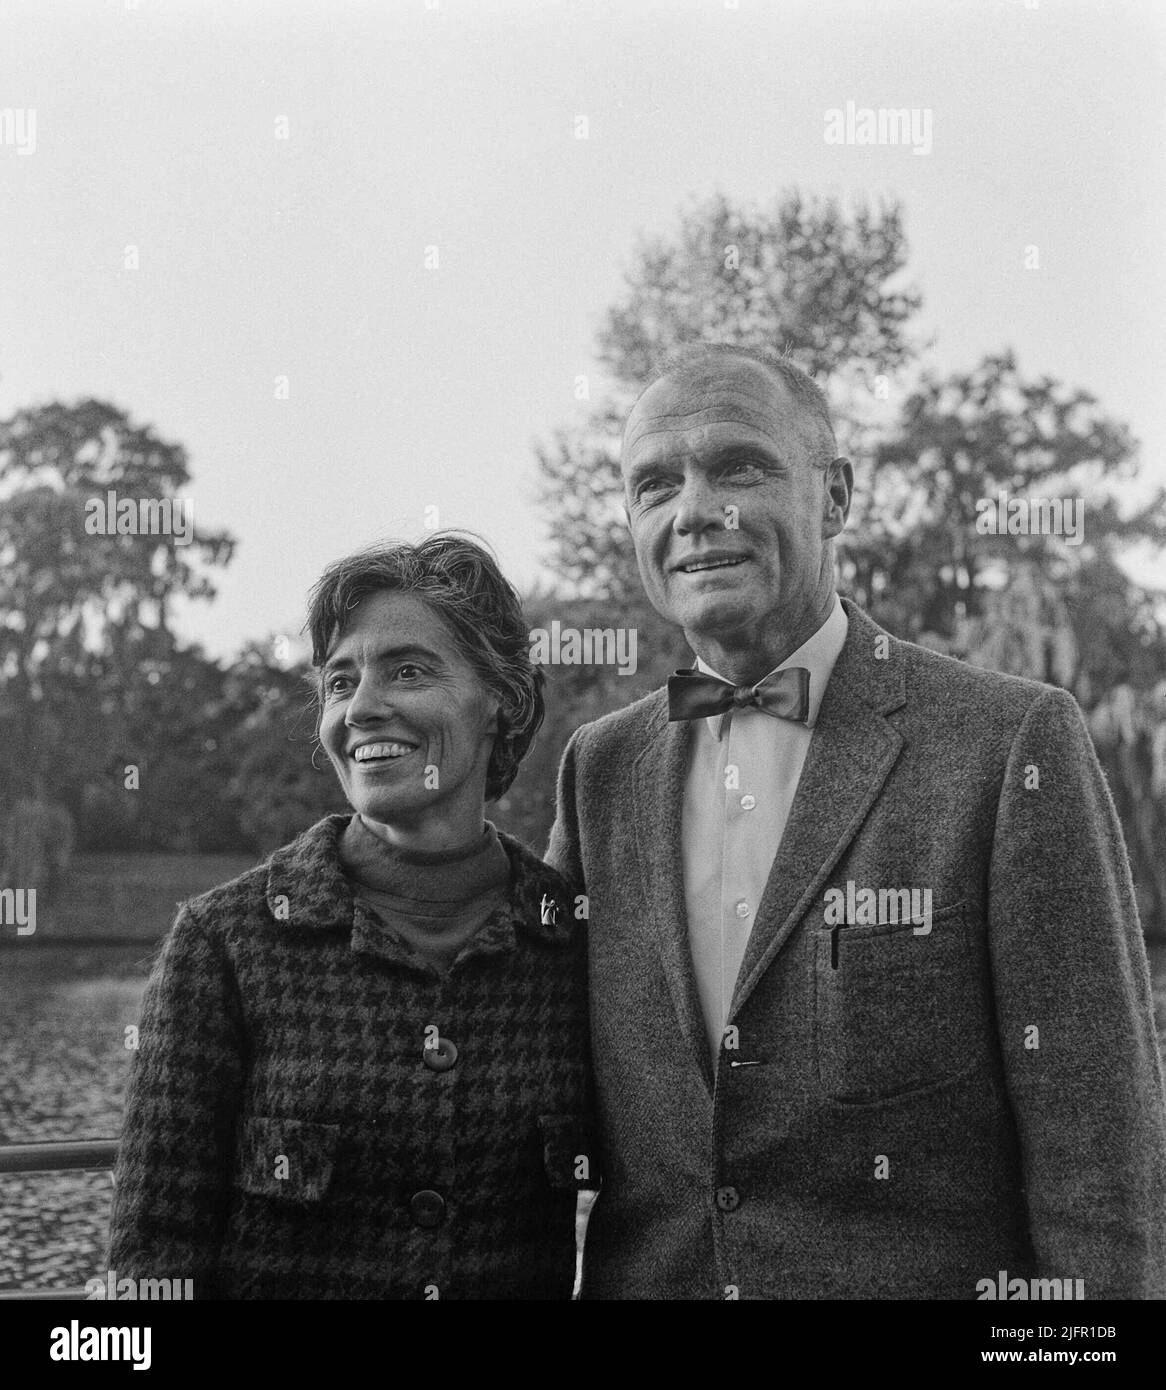 American astronaut John Glenn (right) and wife Annie Glenn pose for a photograph on Saturday, Oct. 9, 1965 at an unknown location in the Netherlands. A distinguished U.S. Marine Corps fighter pilot and one of the National Aeronautics and Space Administration's original seven Project Mercury astronauts, John Glenn made the first supersonic transcontinental flight across the United States in 1957 and became the first American to orbit the Earth in 1962. (Apex MediaWire Photo by Jack de Nijs/Algemeen Nederlandsch Fotobureau) Stock Photo